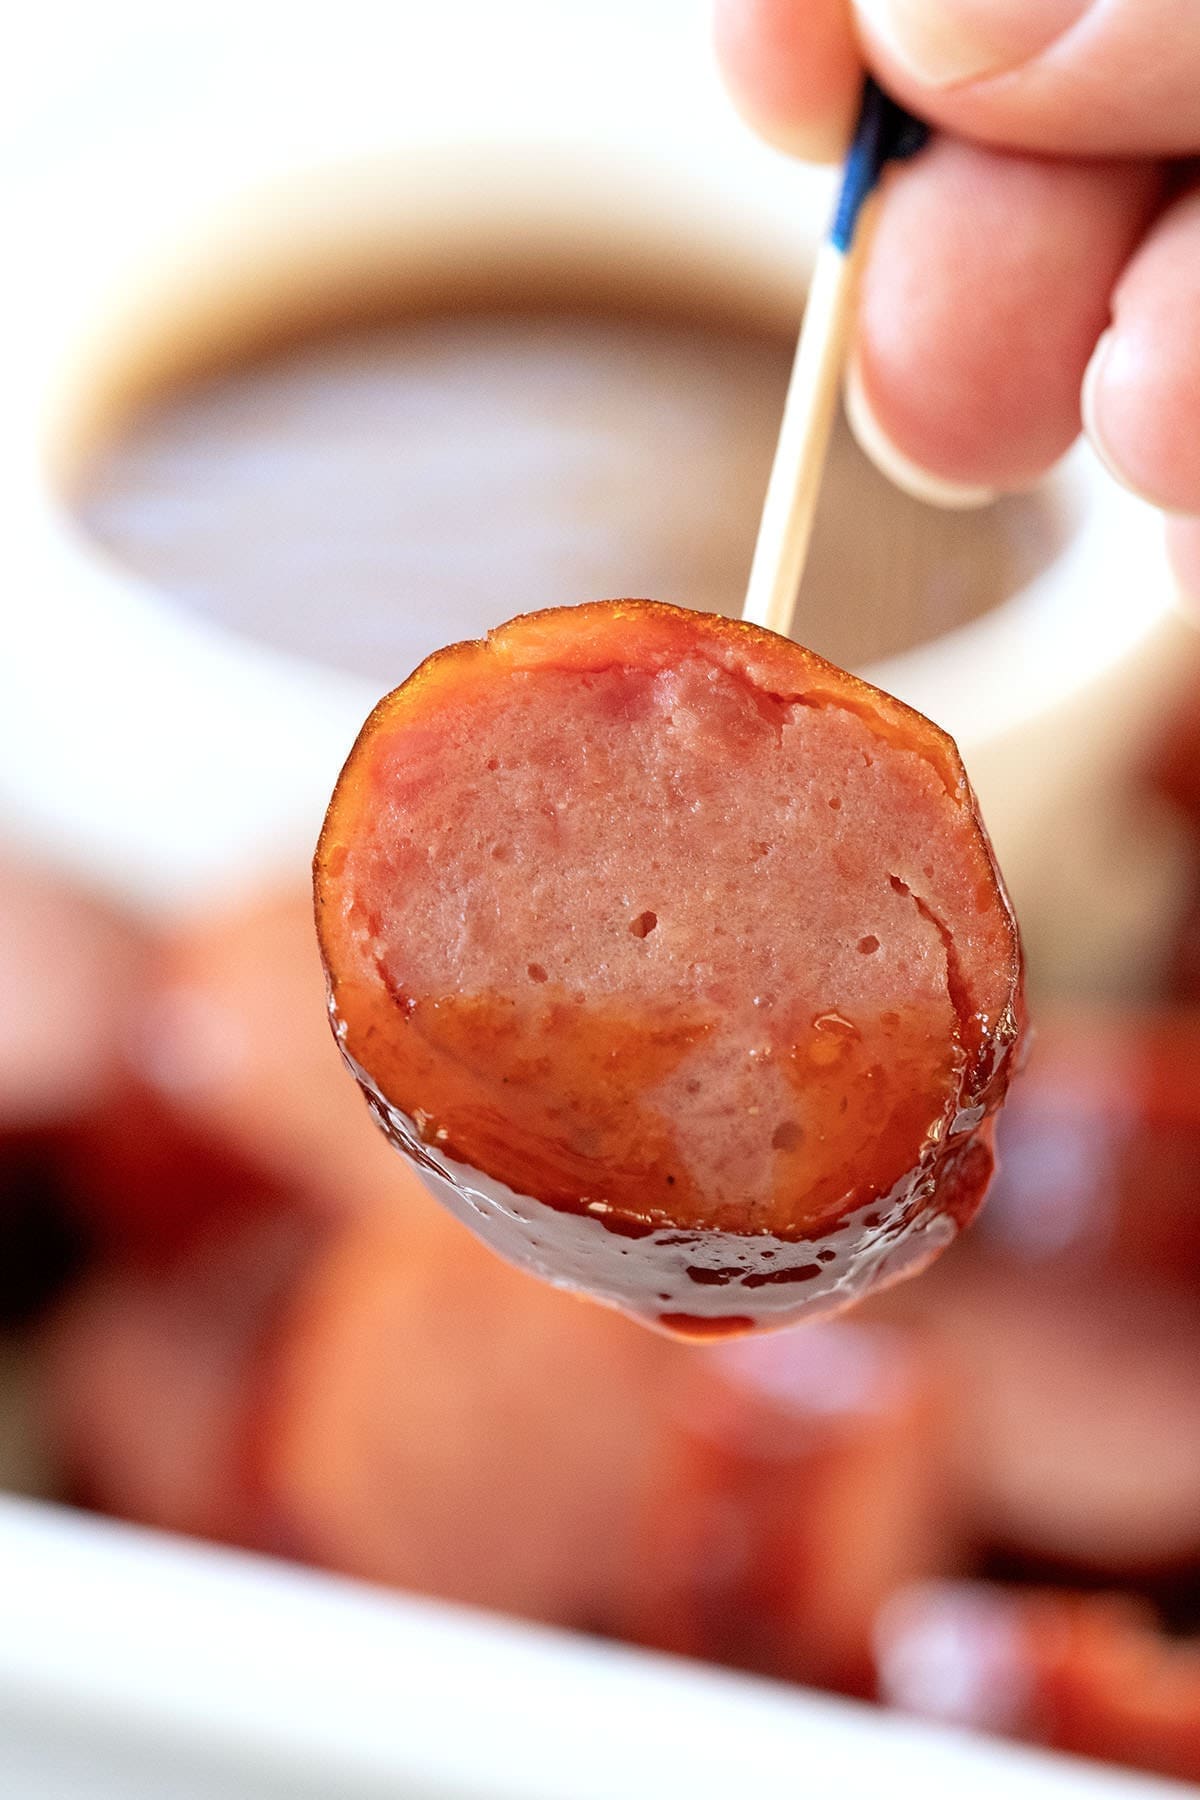 Sliced sausage dipped in BBQ sauce.